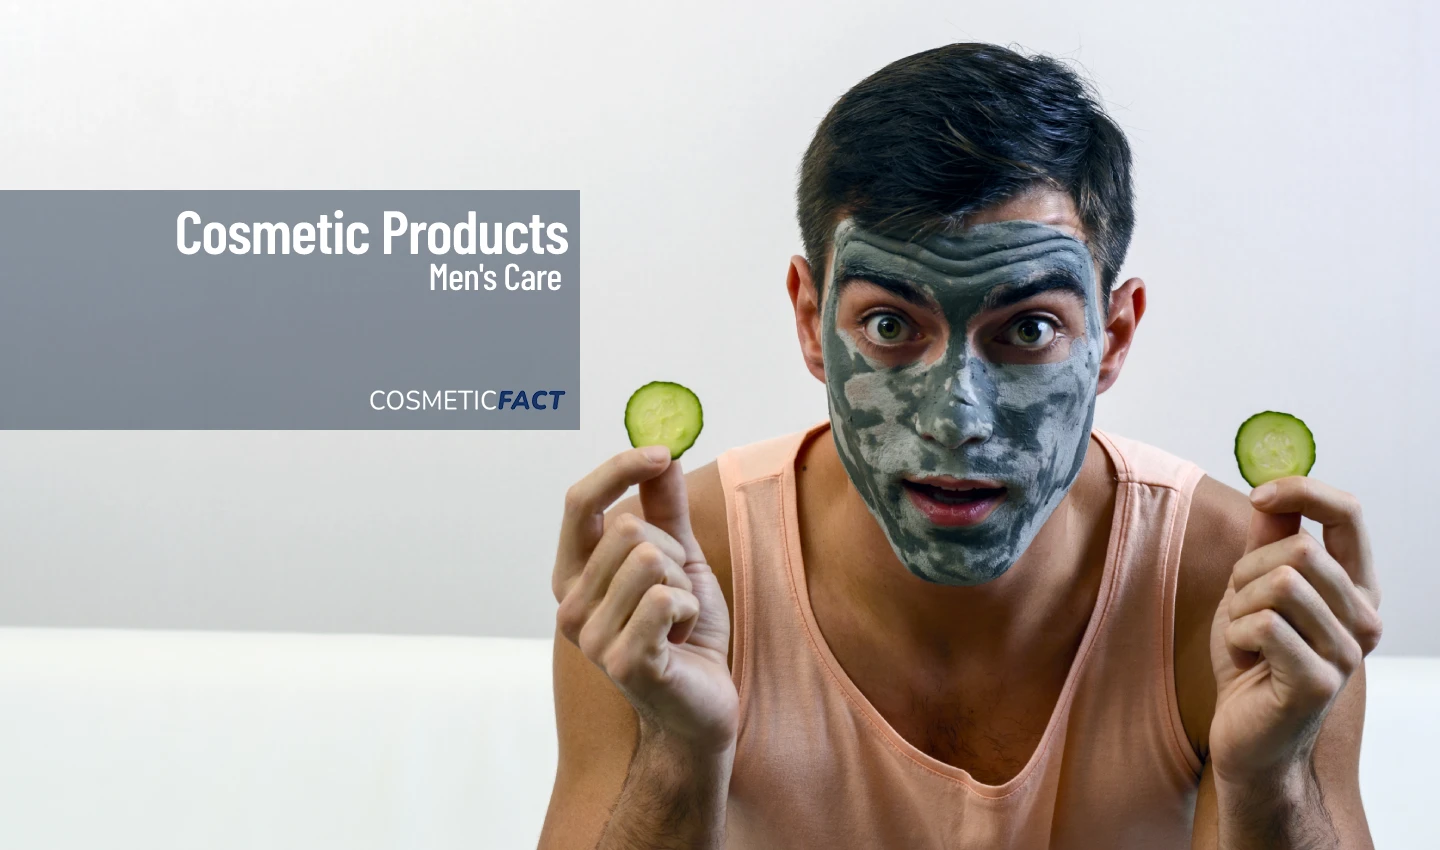 A man wearing a face mask and holding out a cucumber slice, representing a DIY face mask for men's skin care.